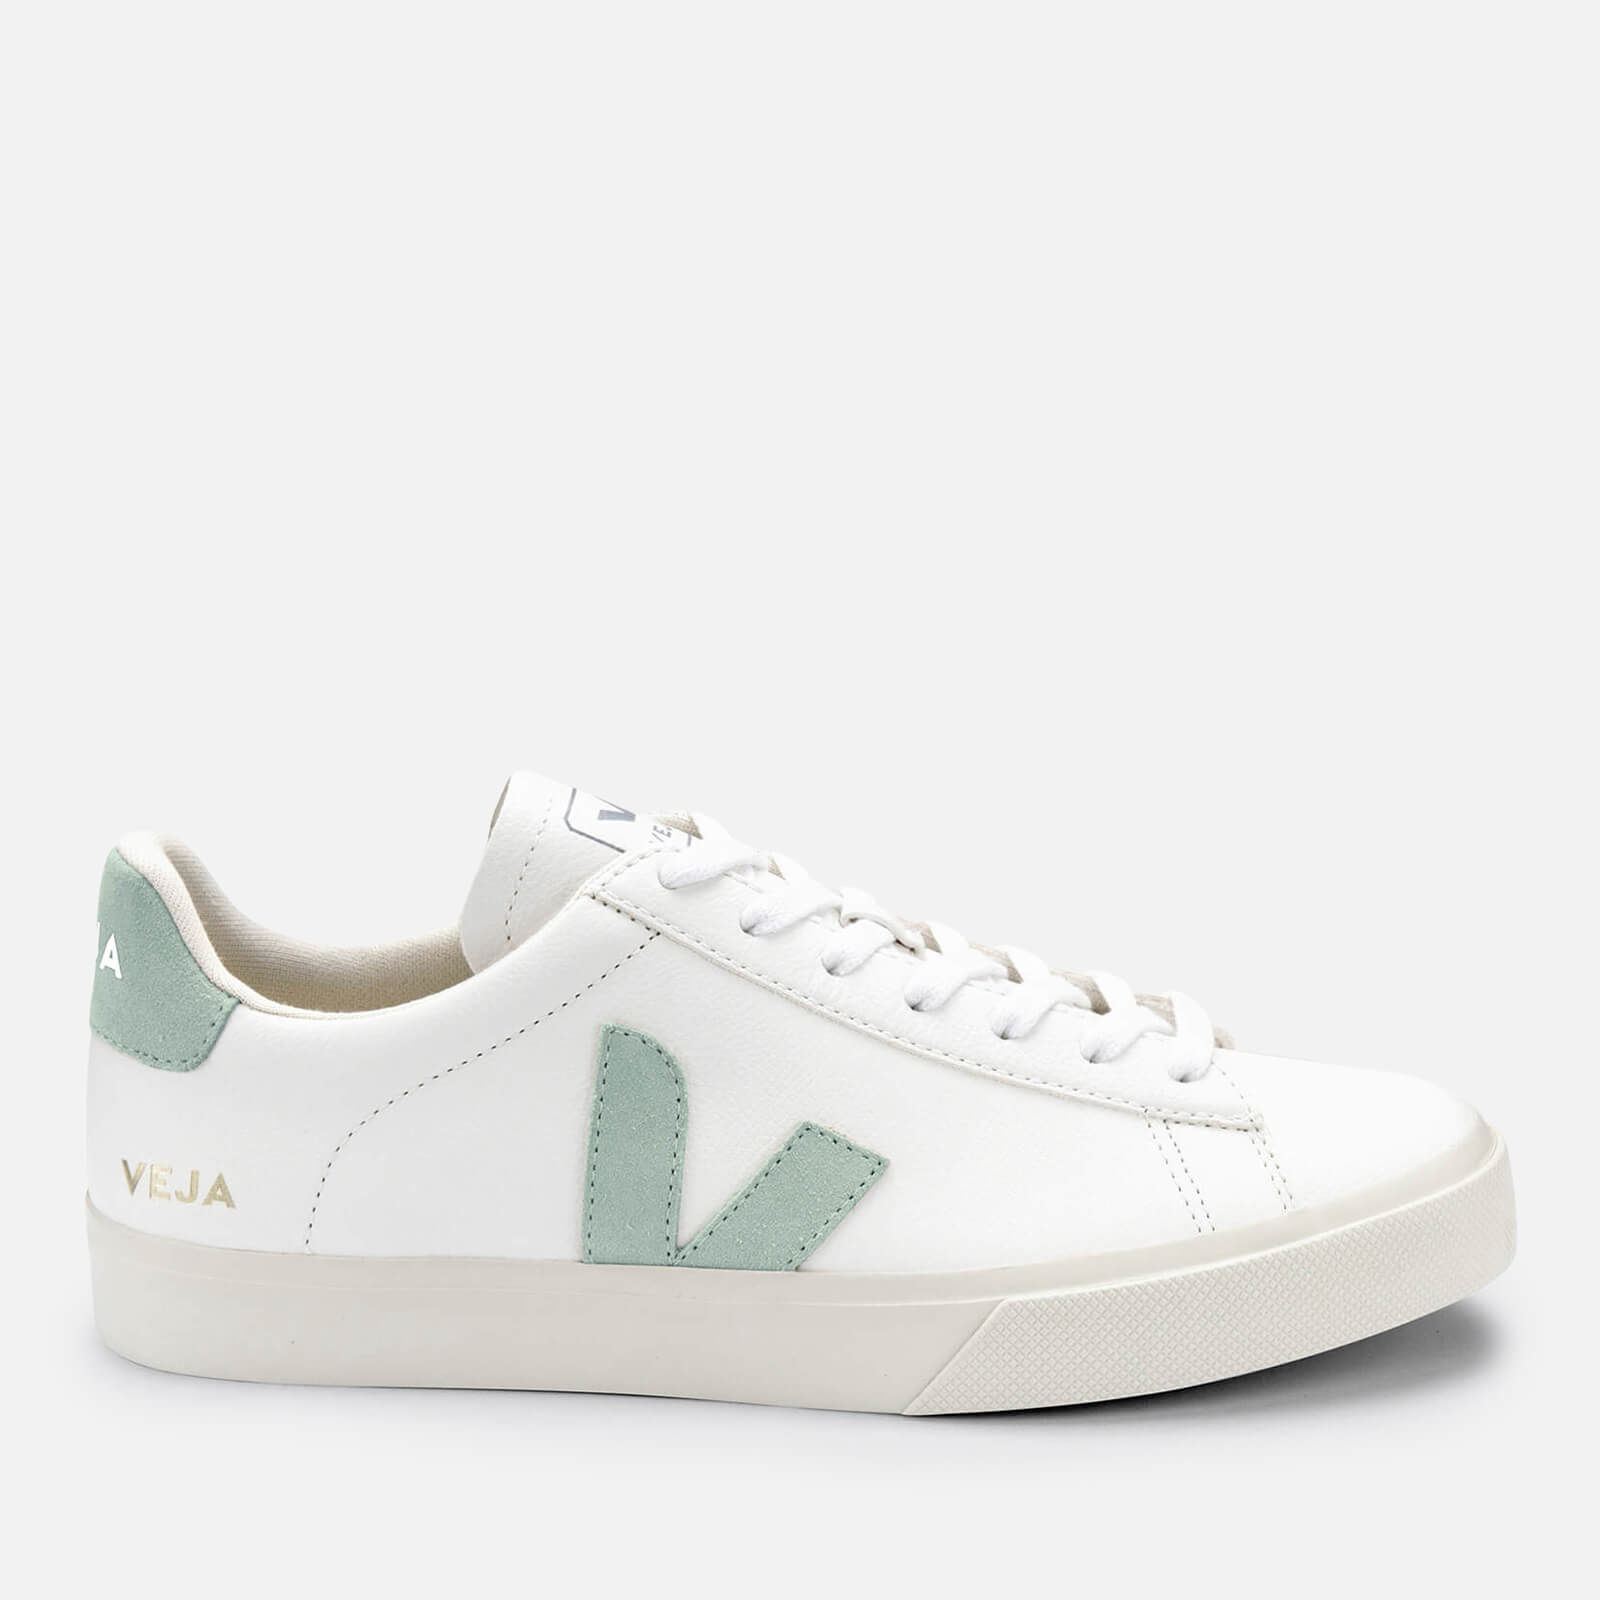 Veja Women’s Campo Chrome Free Leather Trainers - Extra White/Matcha